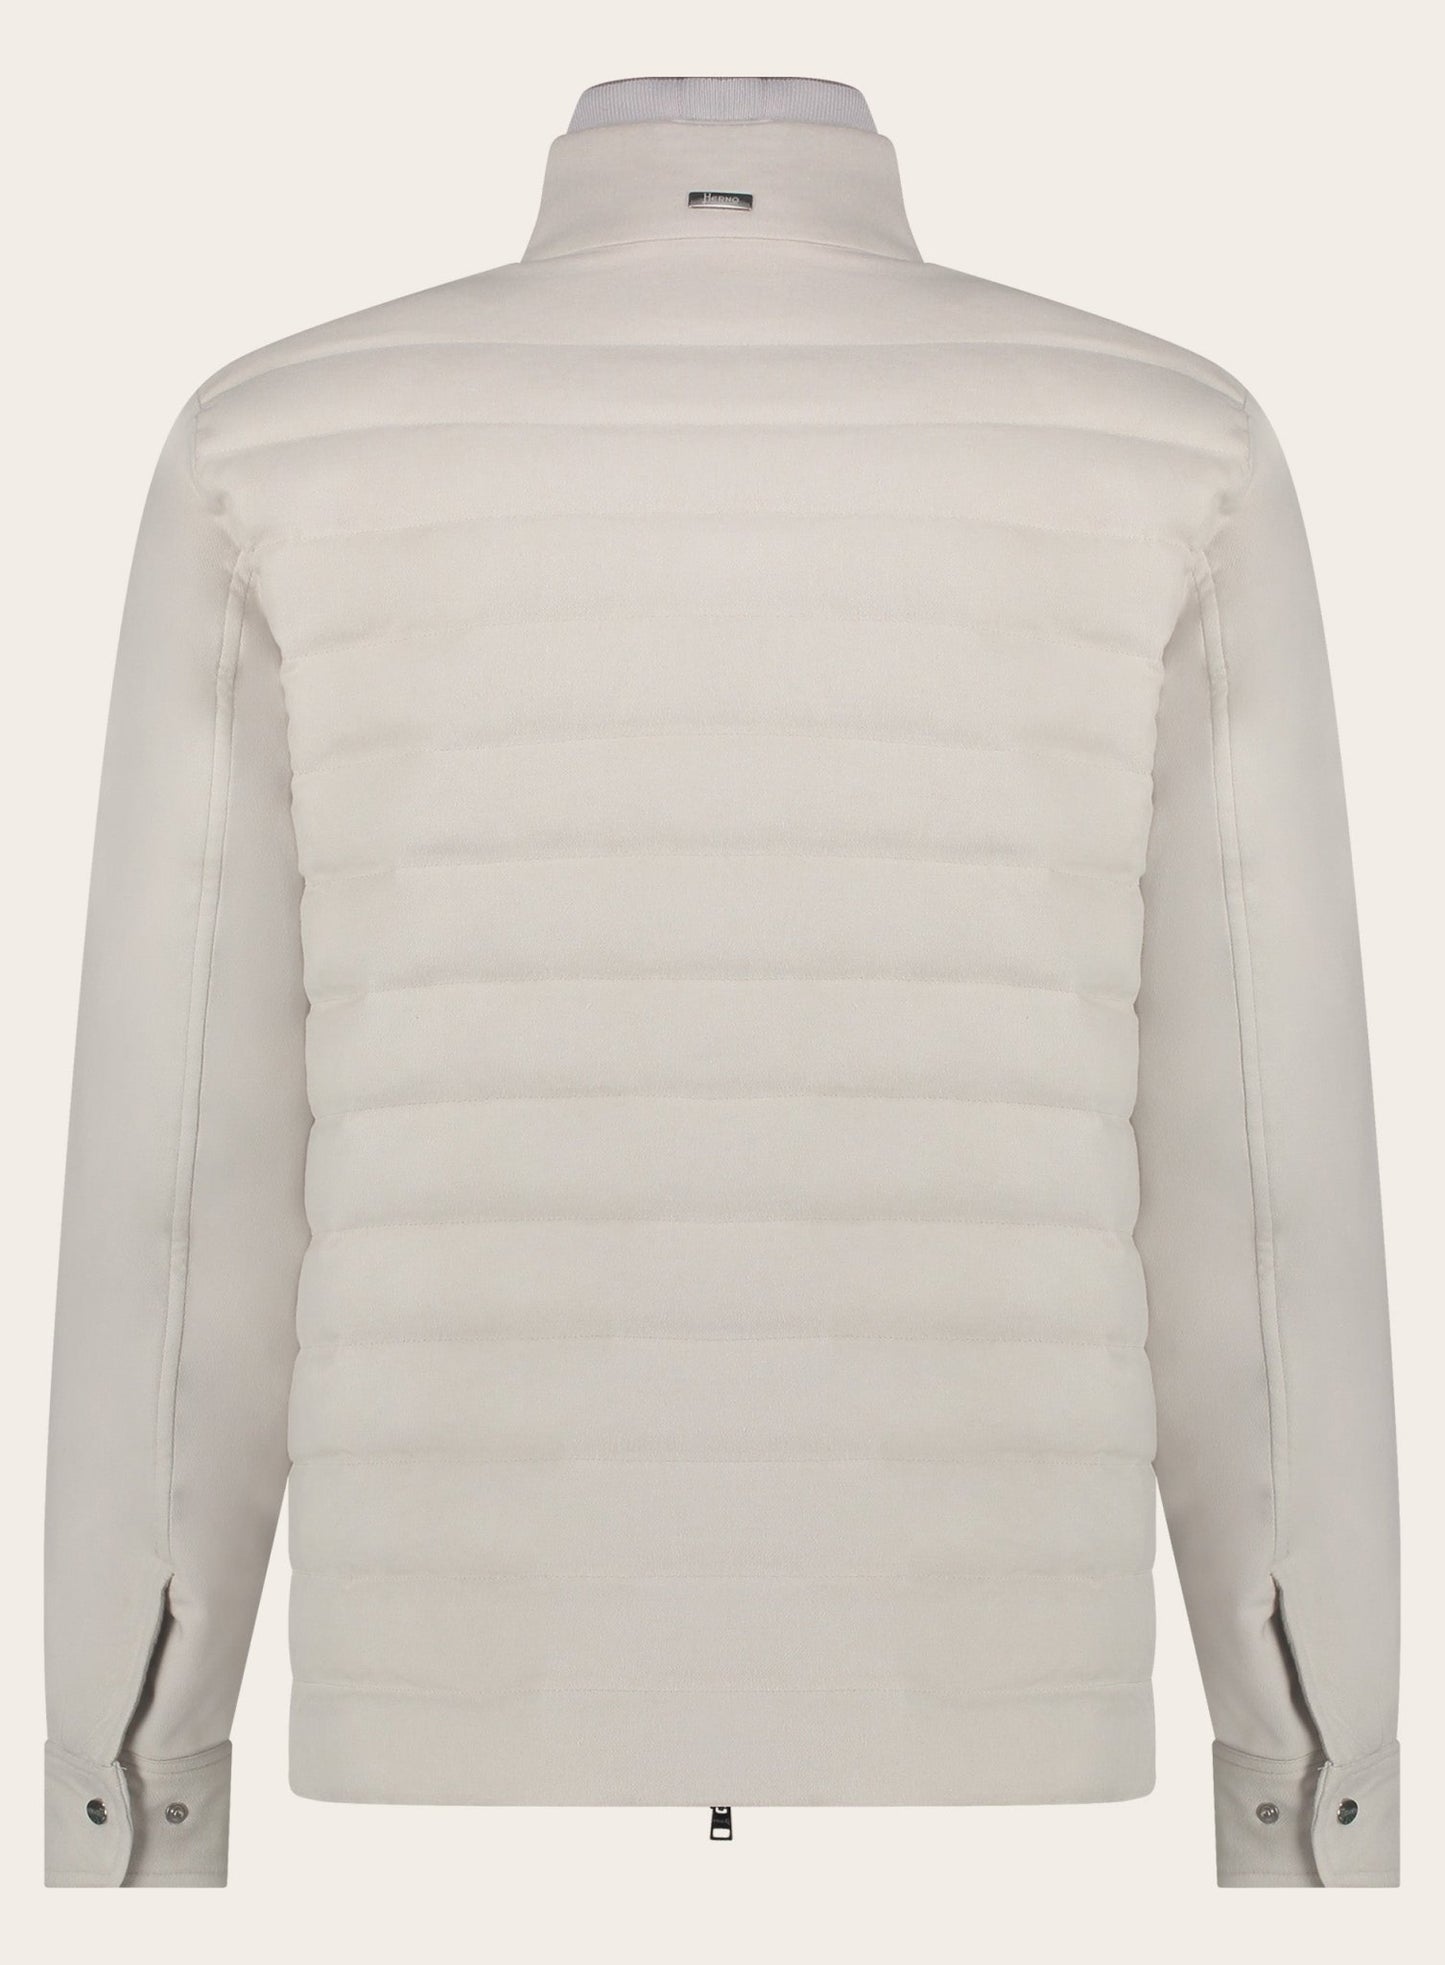 Padded jacket made of silk and cotton